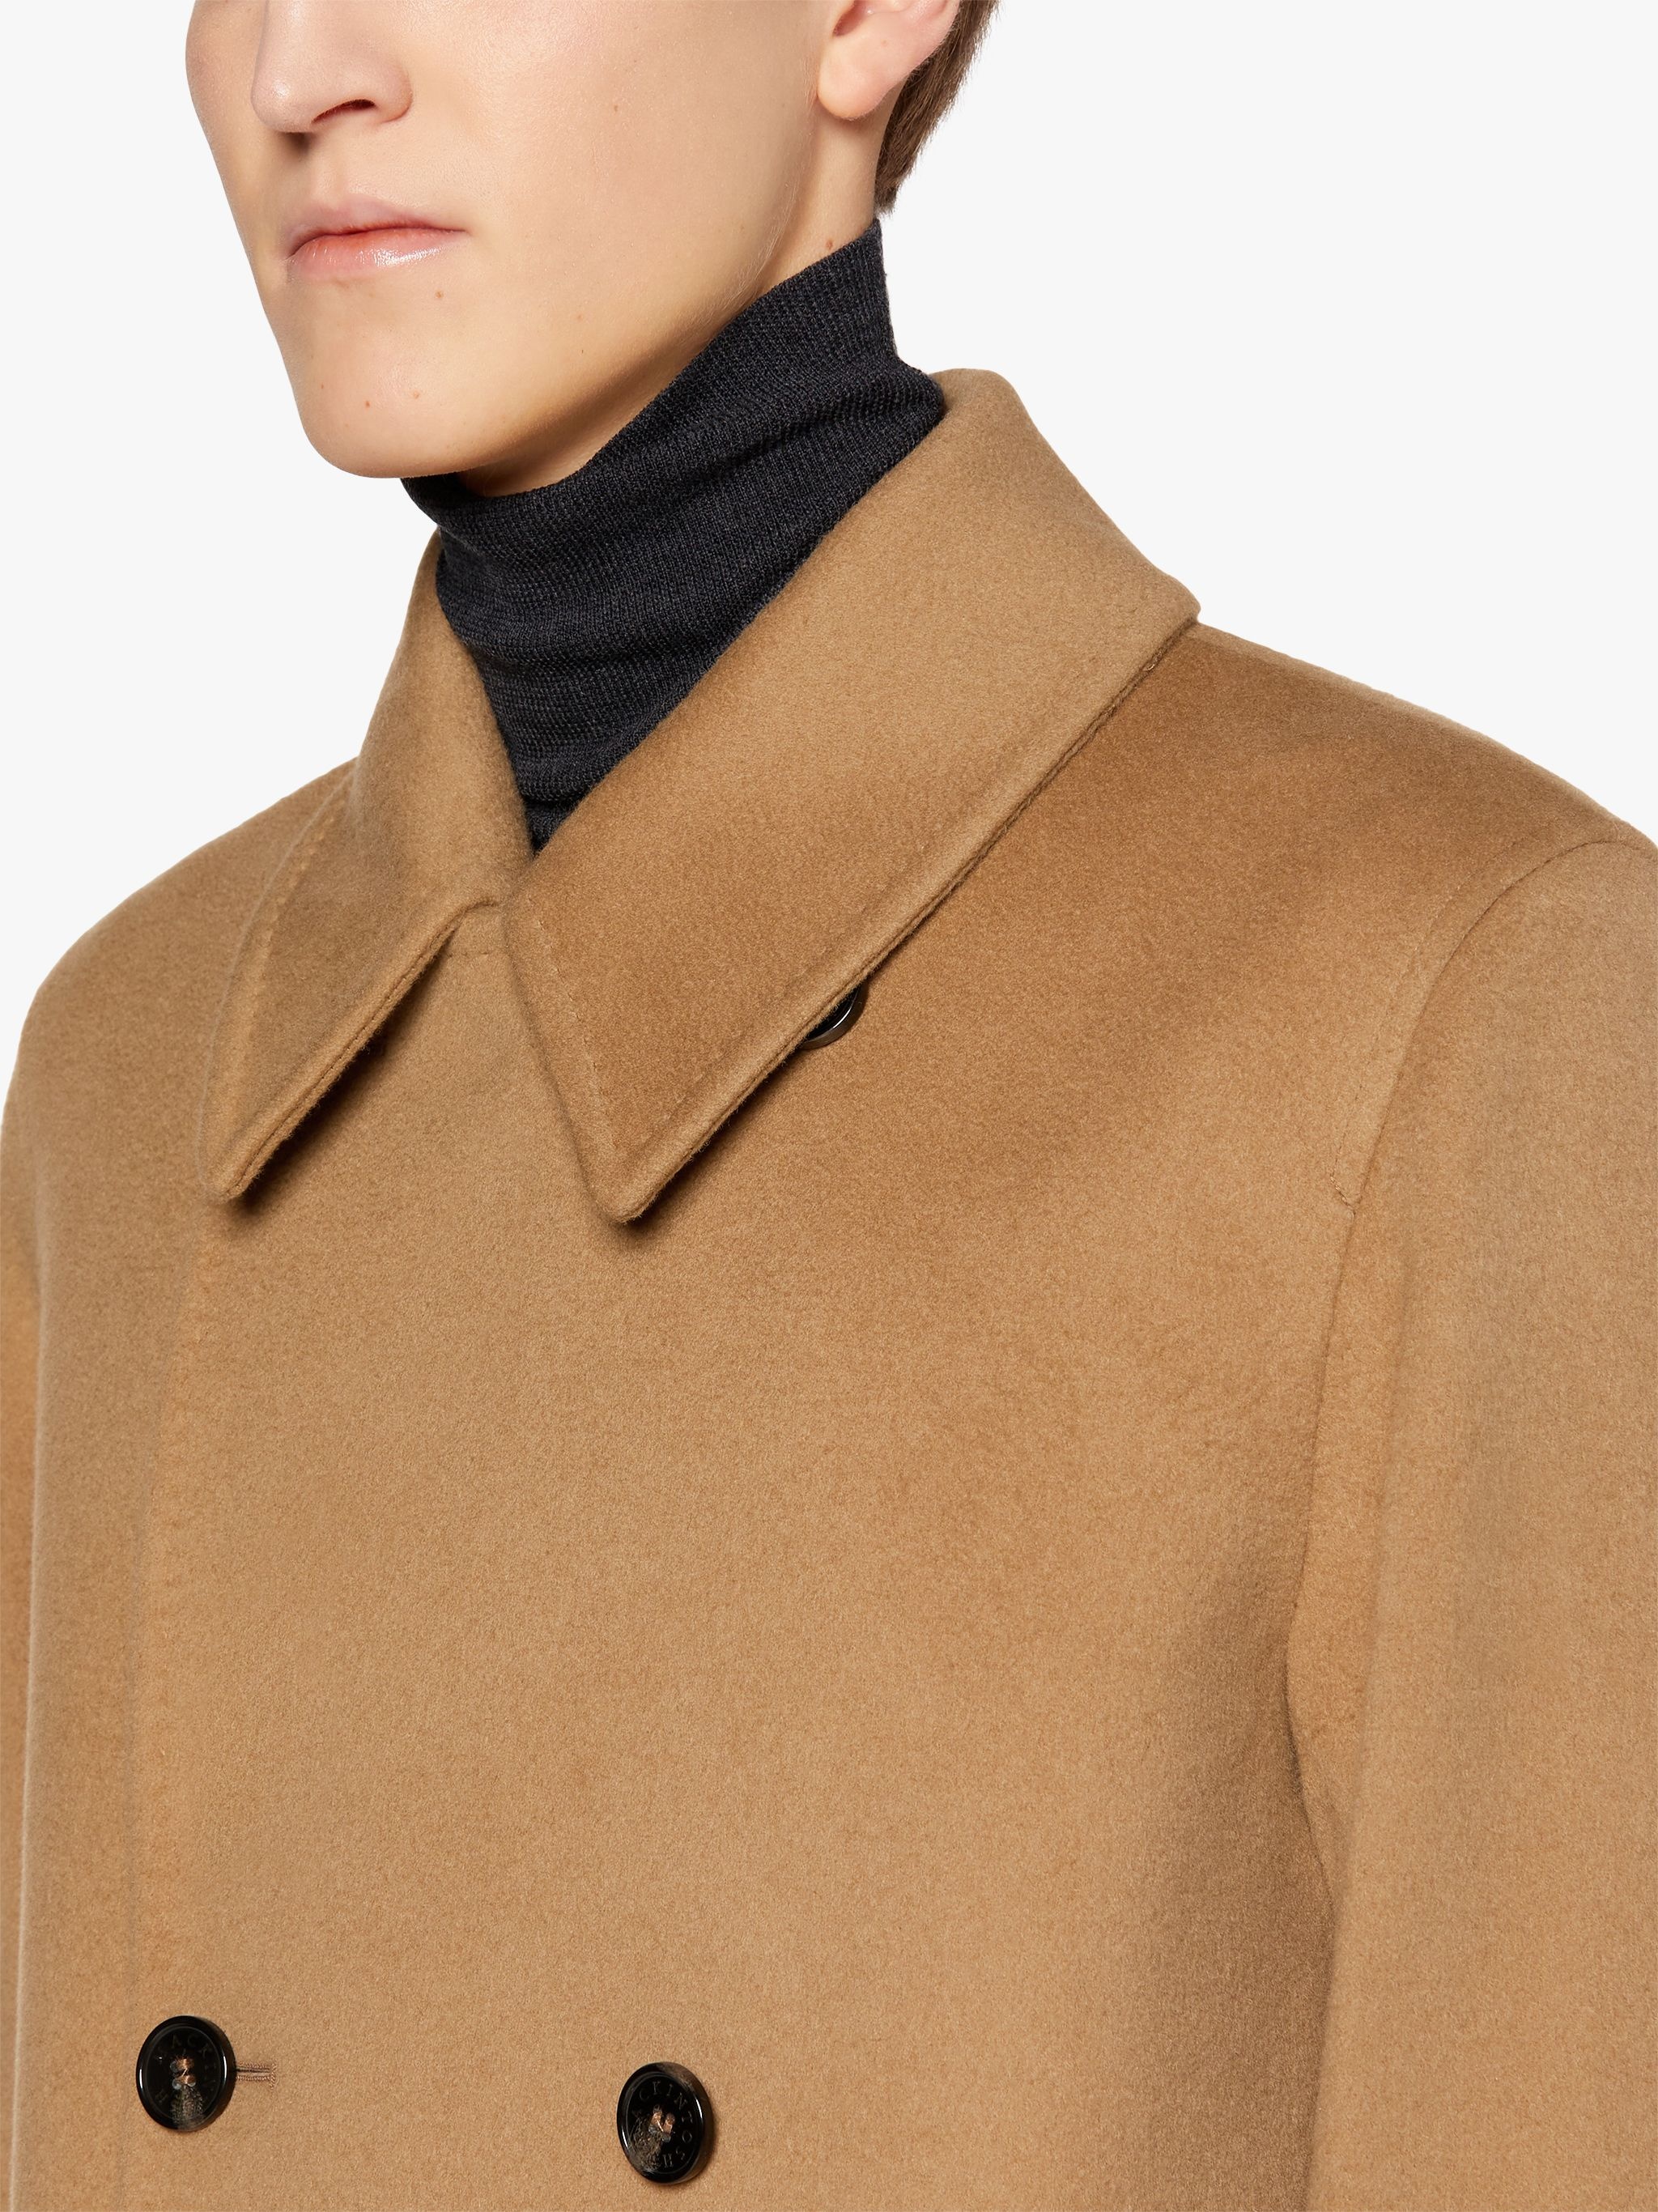 REDFORD BEIGE WOOL & CASHMERE DOUBLE BREASTED COAT | GM-1101 - 5